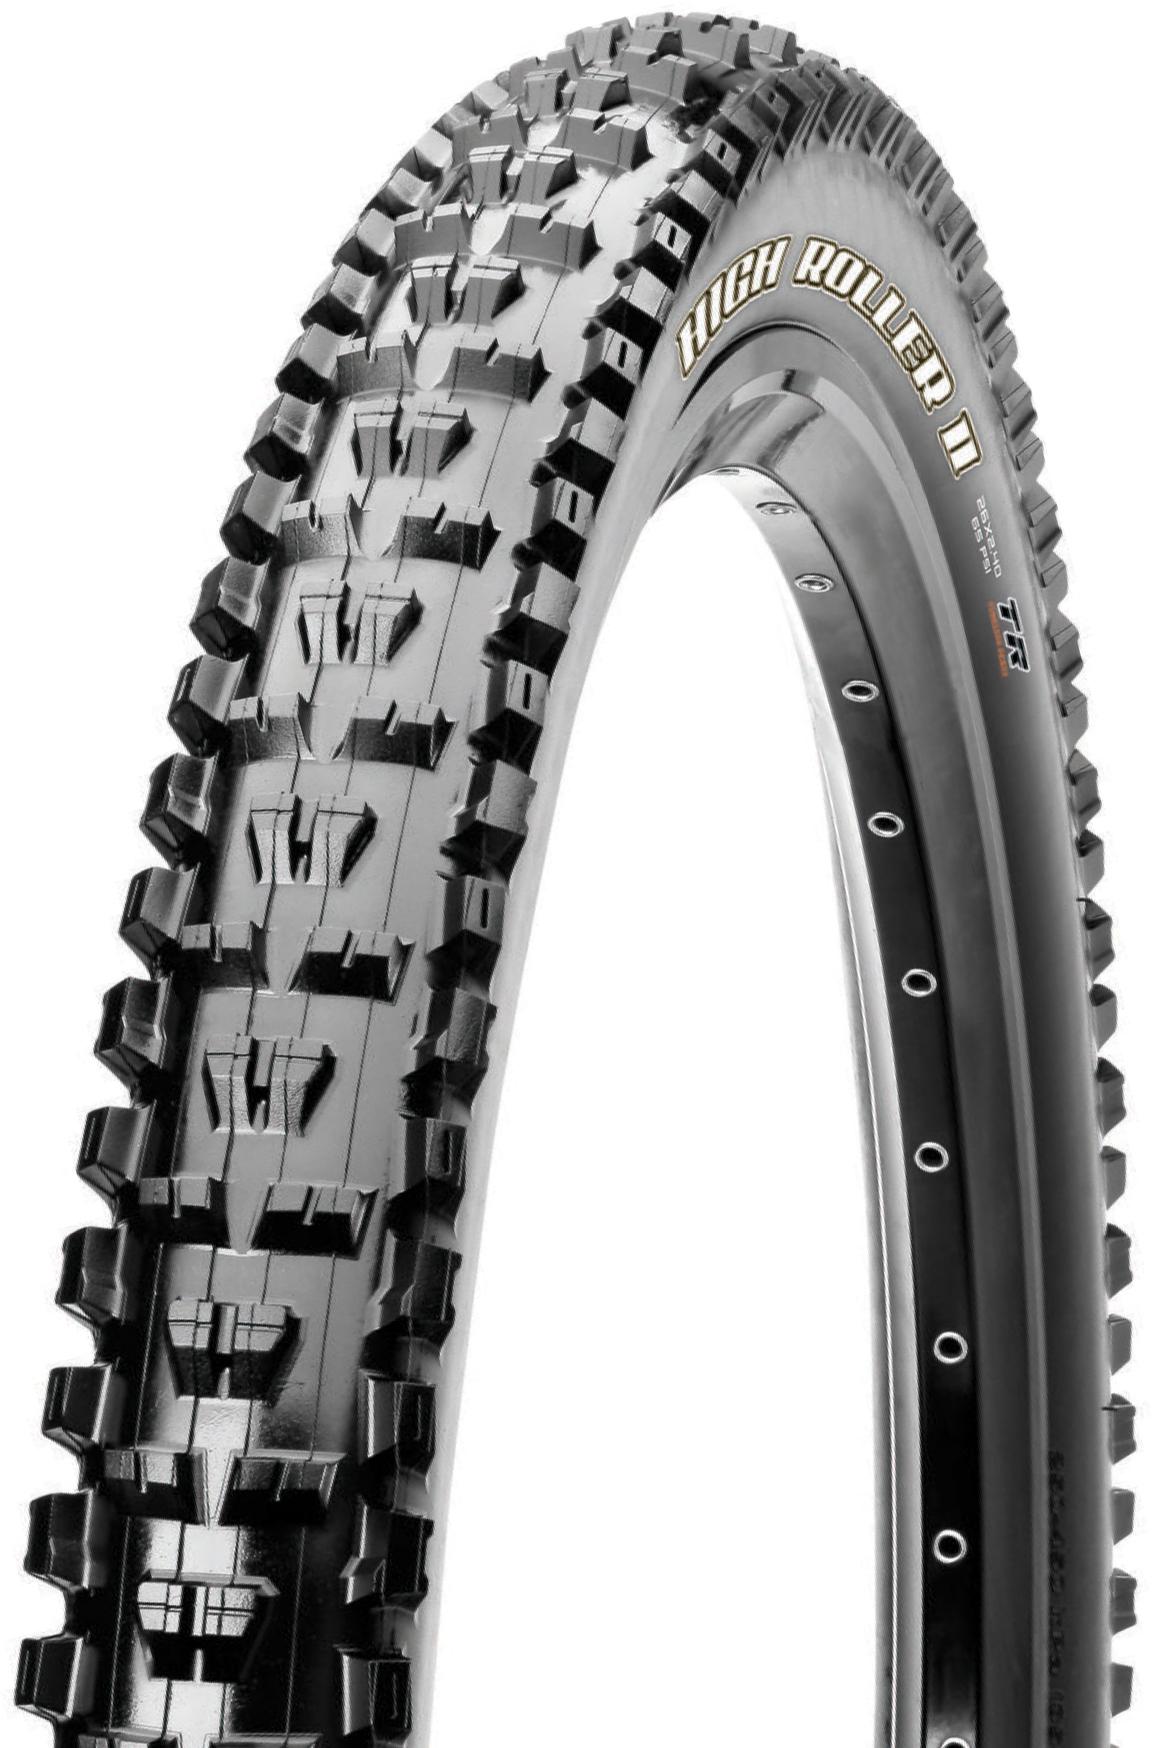 Maxxis High Roller Ii 27.5 X 2.80 Bike Tyre, Dual Compound, Exo/Tr, 60 Tpi